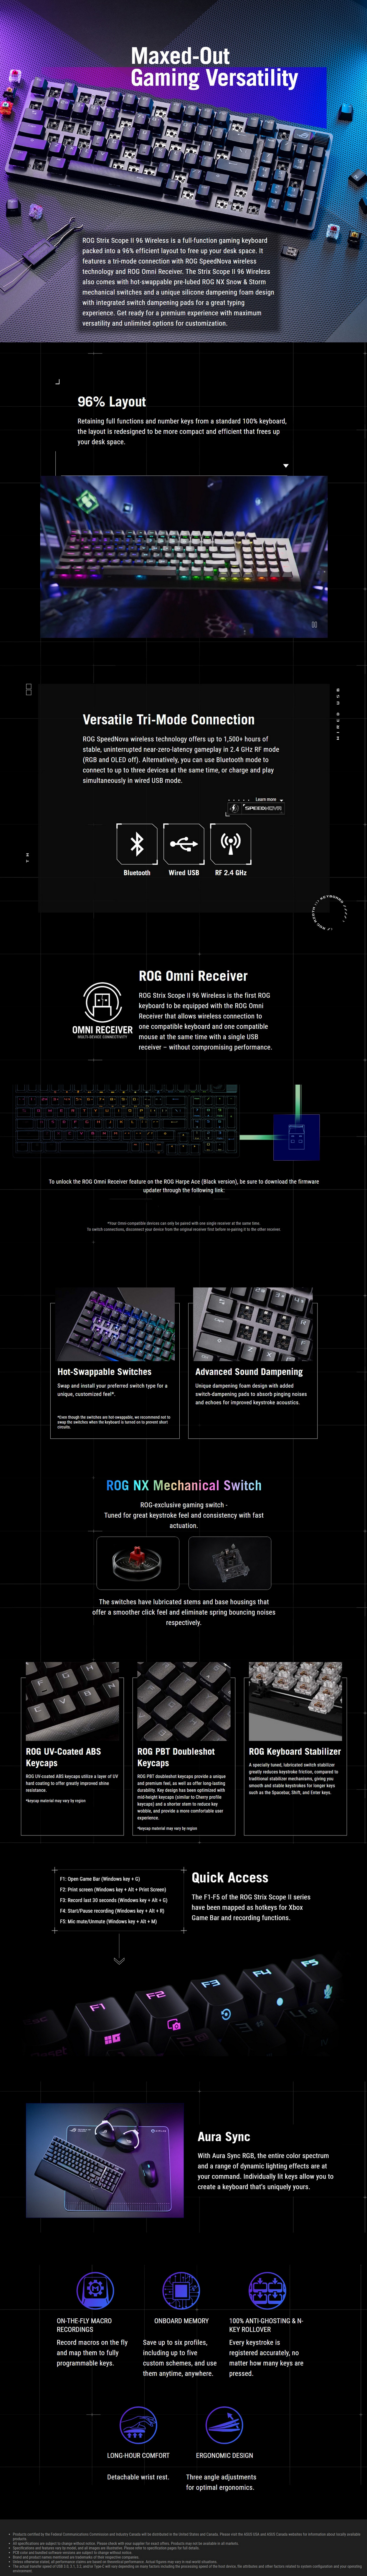 A large marketing image providing additional information about the product ASUS ROG Strix Scope II 96 Wireless Mechanical Gaming Keyboard - Snow Switch - Additional alt info not provided